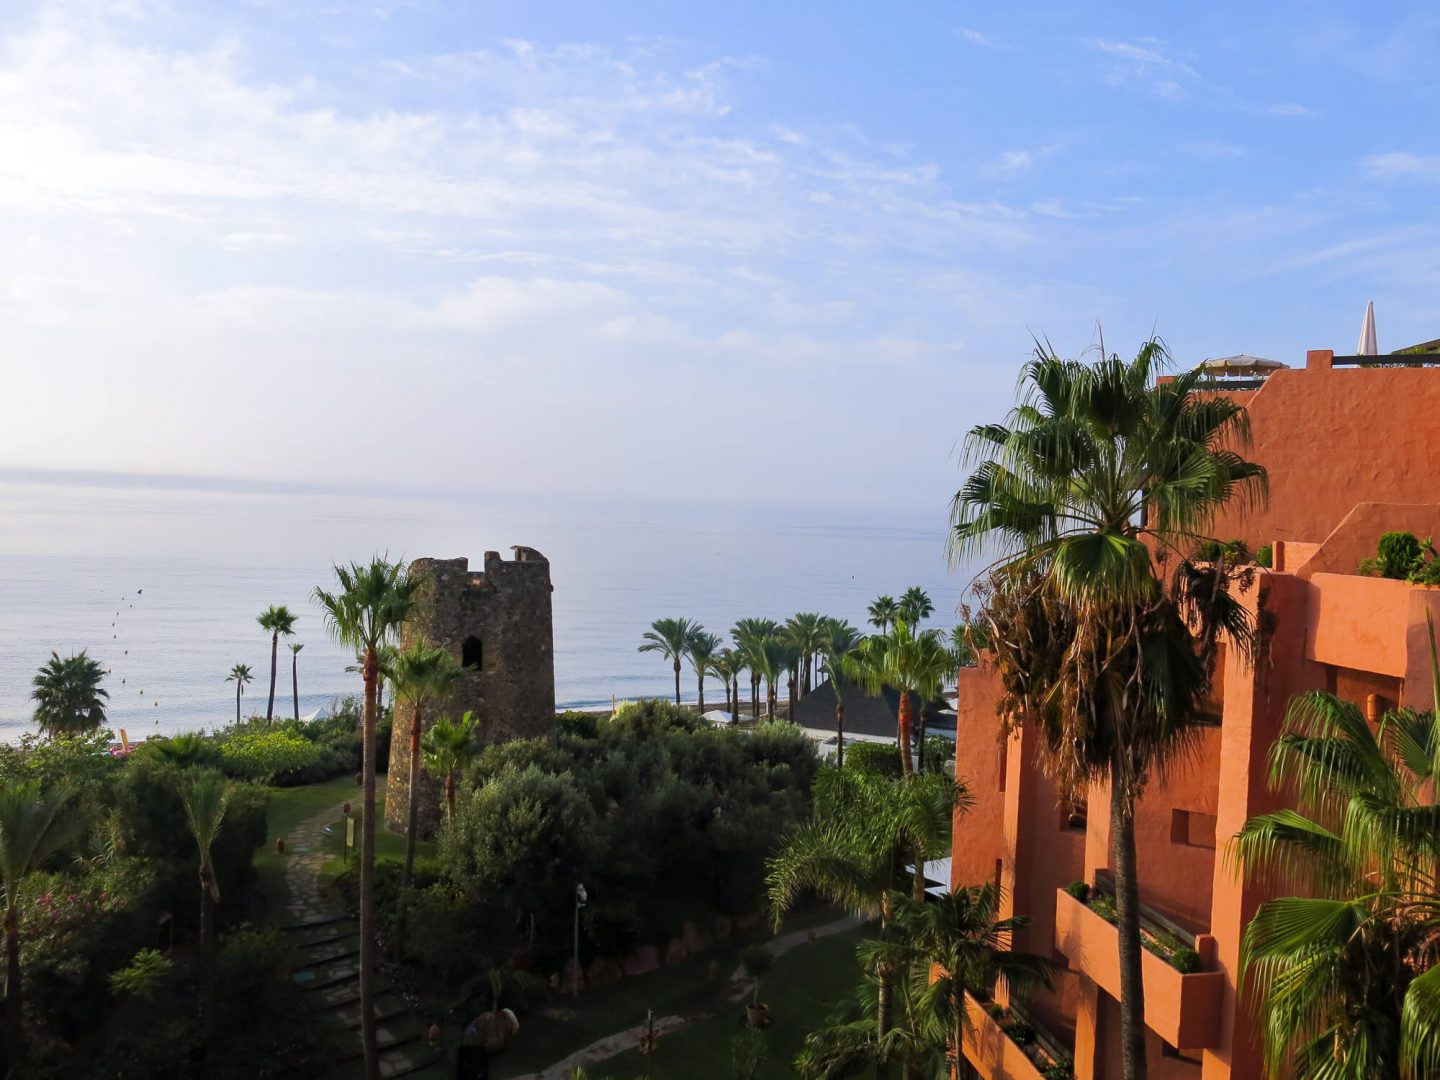 The view from the hotel rooms at Kempinski Hotel Bahía, Spain